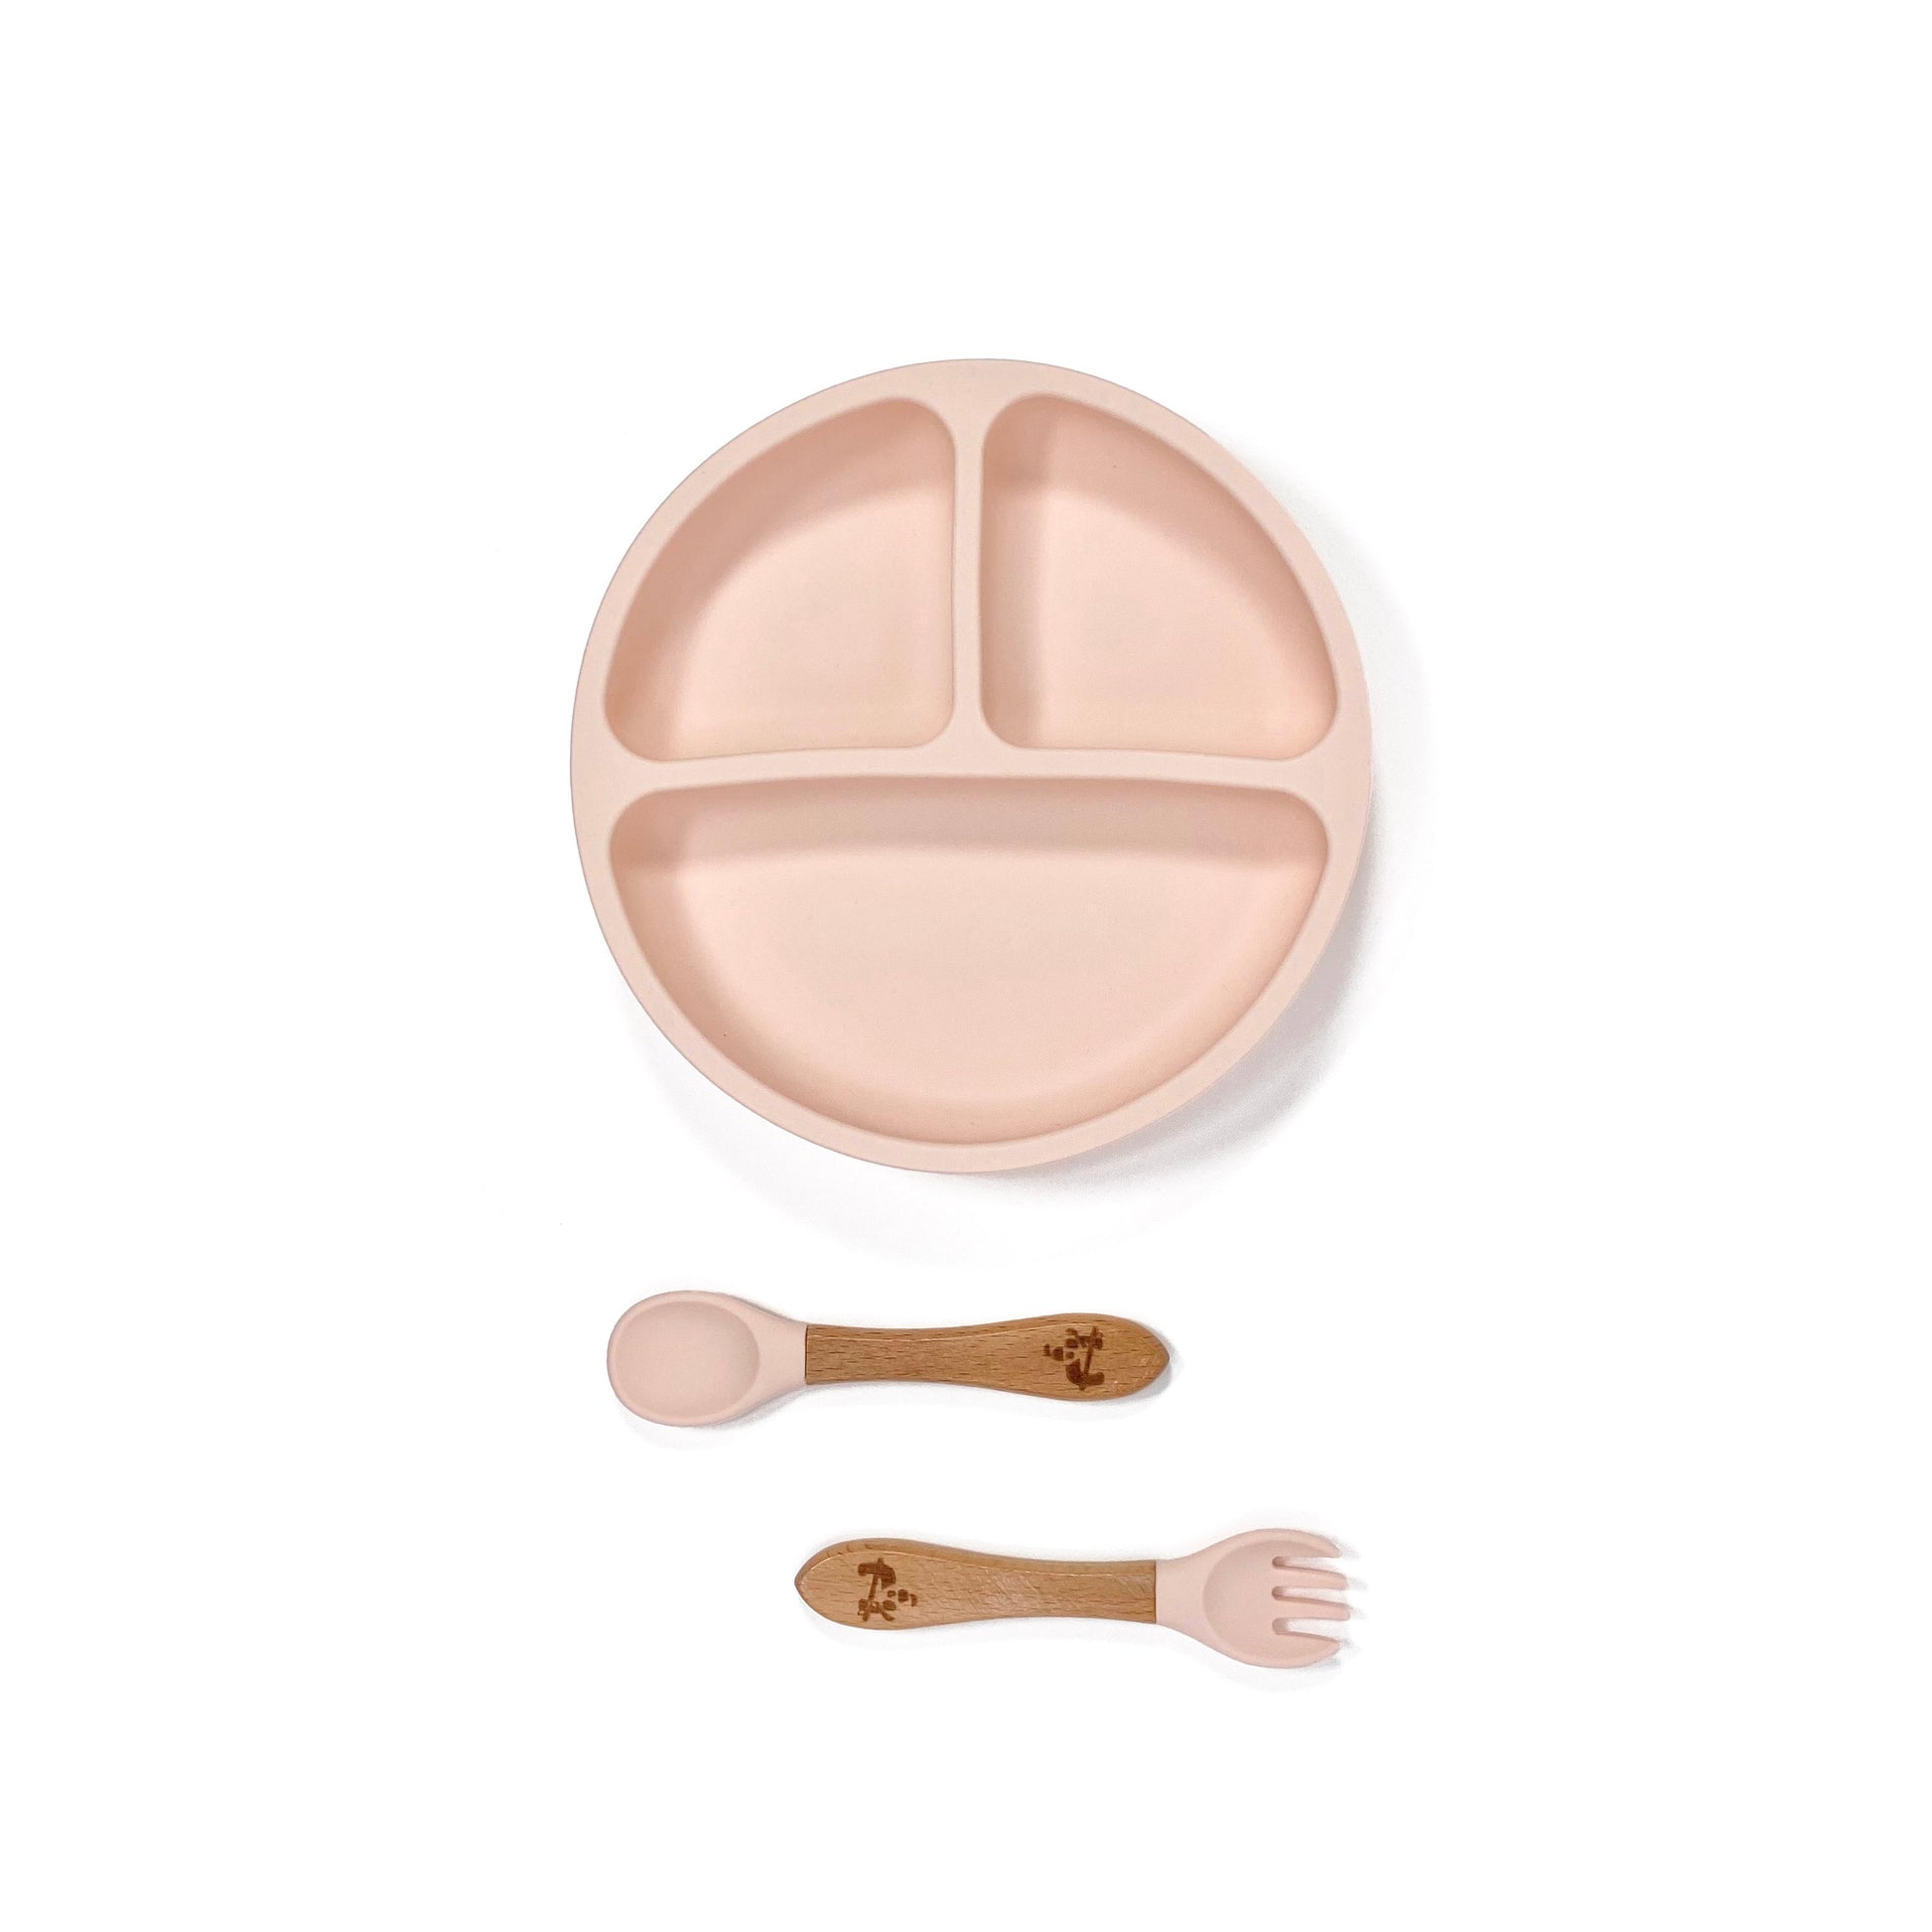 A peachy pink silicone children’s section plate with cups on the base, and matching bamboo and silicone cutlery.